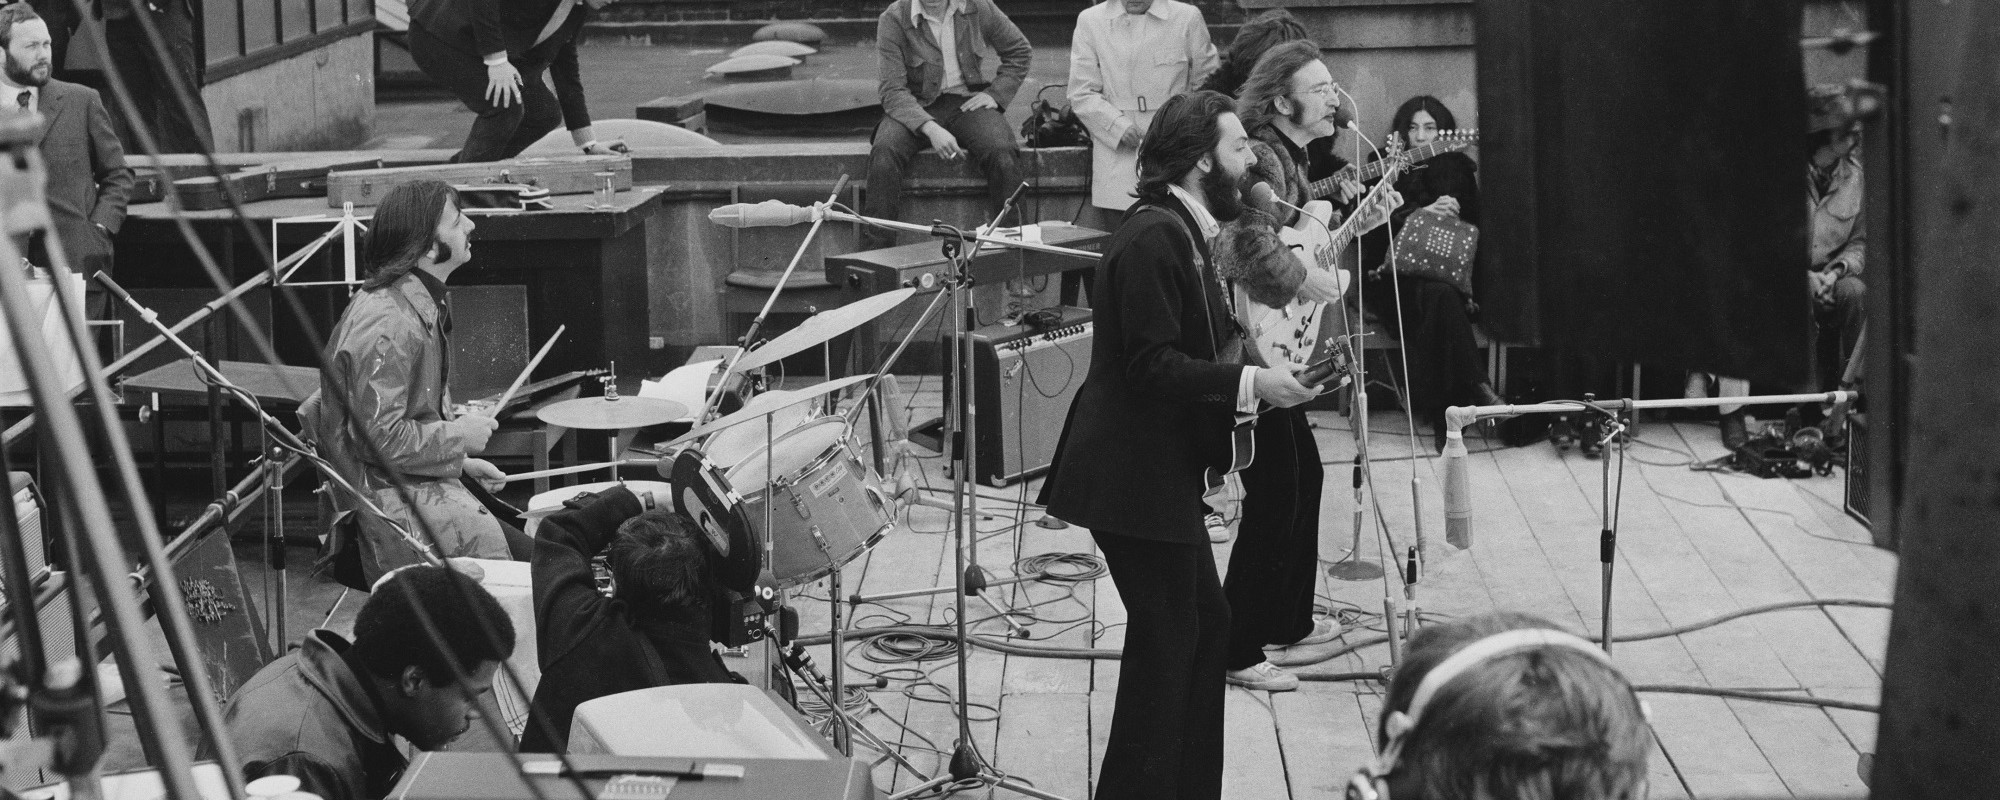 “There Will Be an Answer”: The Beatles Post Enigmatic Message Fans Are Guessing Could Be Related to the ‘Let It Be’ Movie